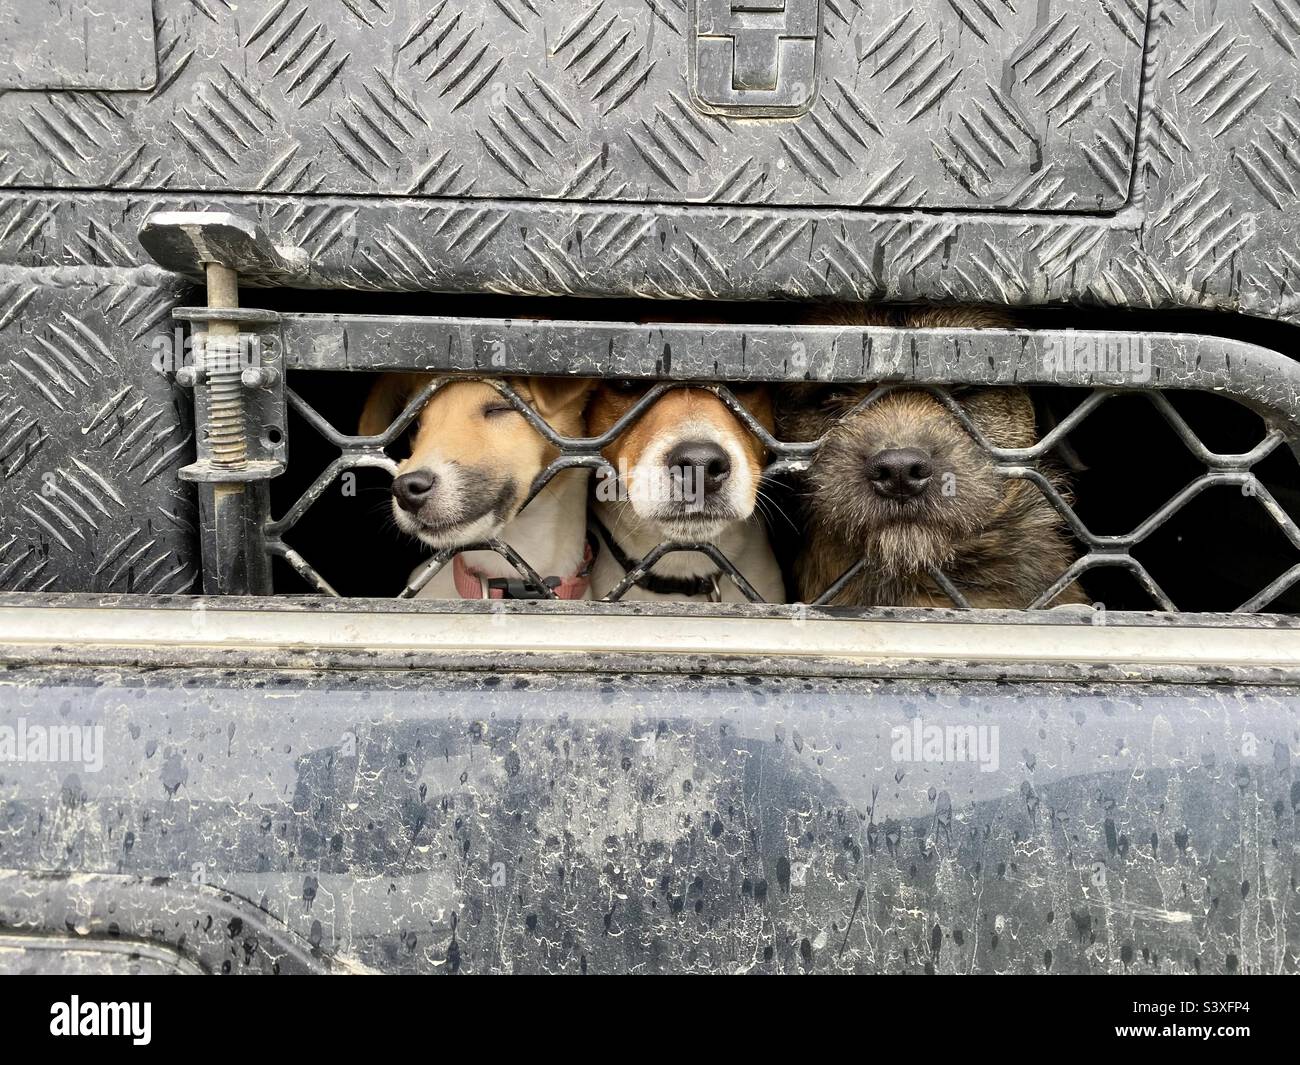 Three small dogs in the back of a farm truck Stock Photo